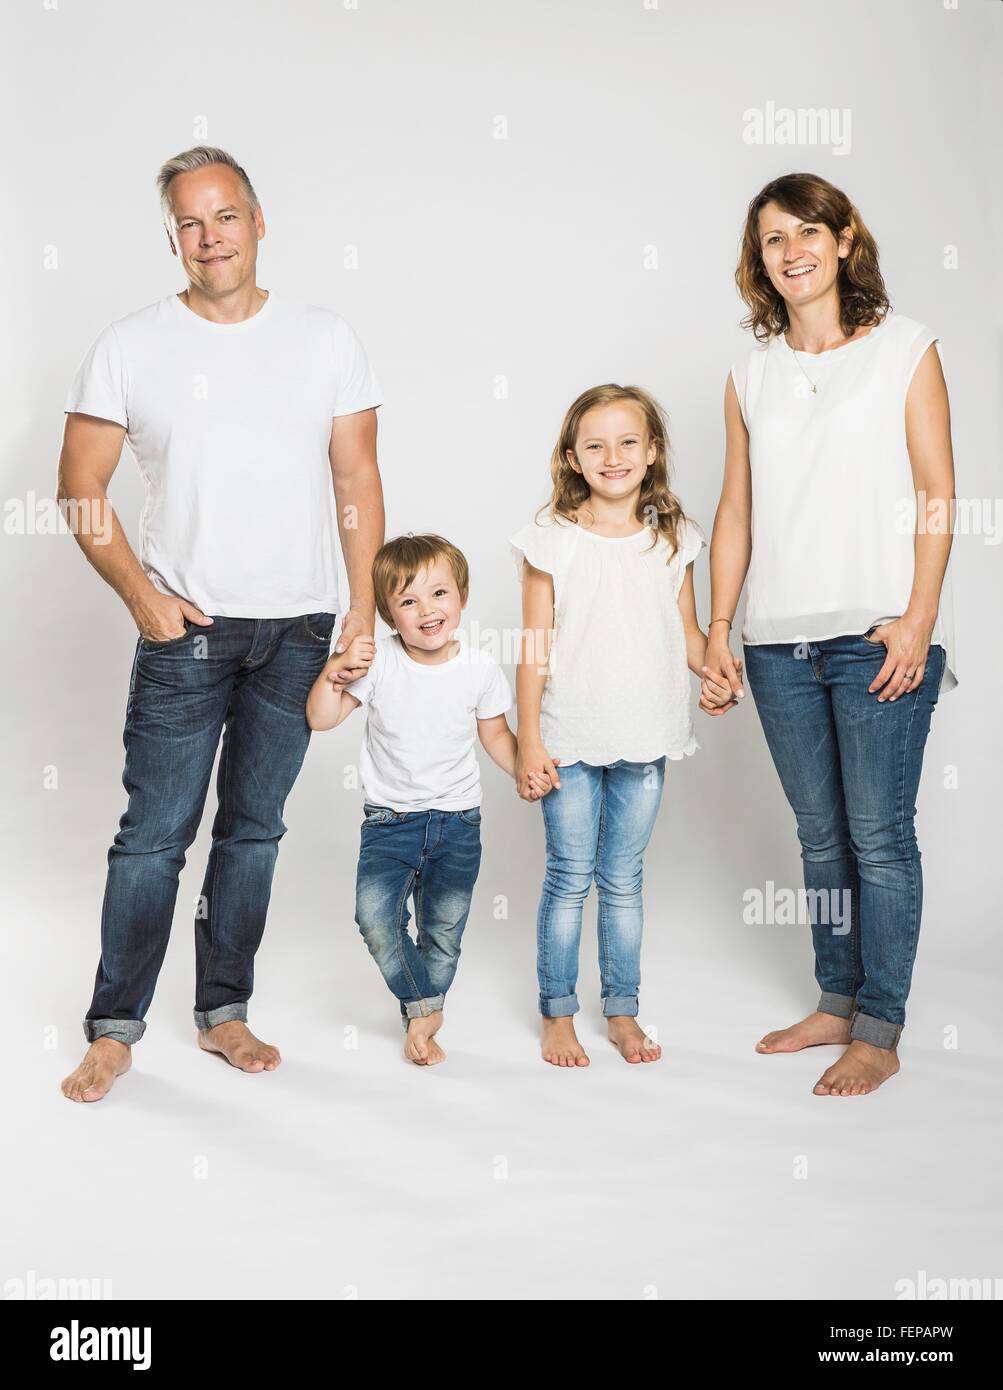 Studio portrait of parents holding hands with son and daughter Stock Photo